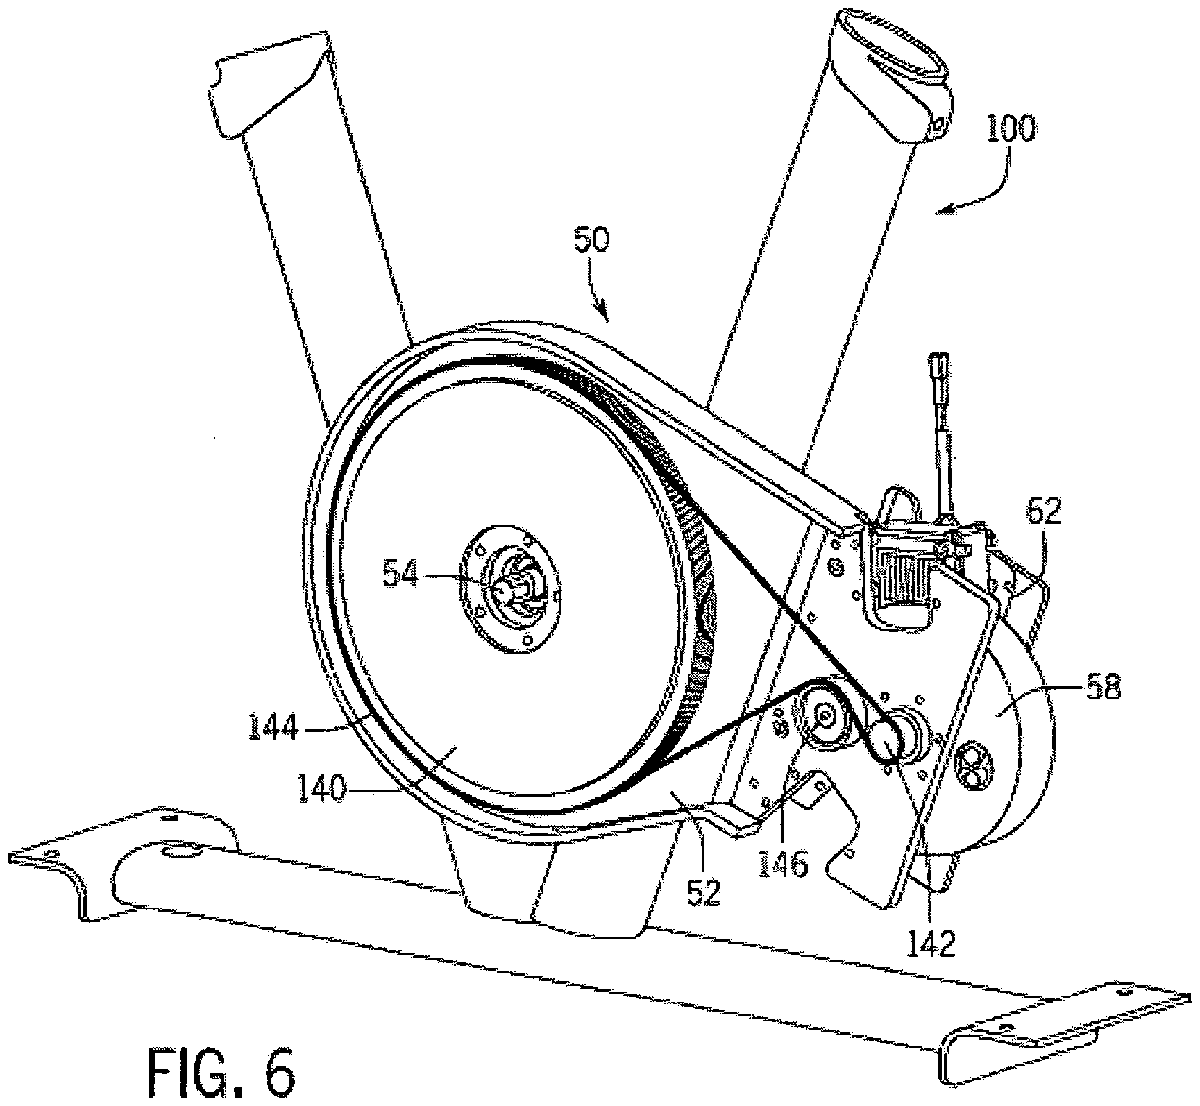 patent drawings for sram indoor cycling trainer